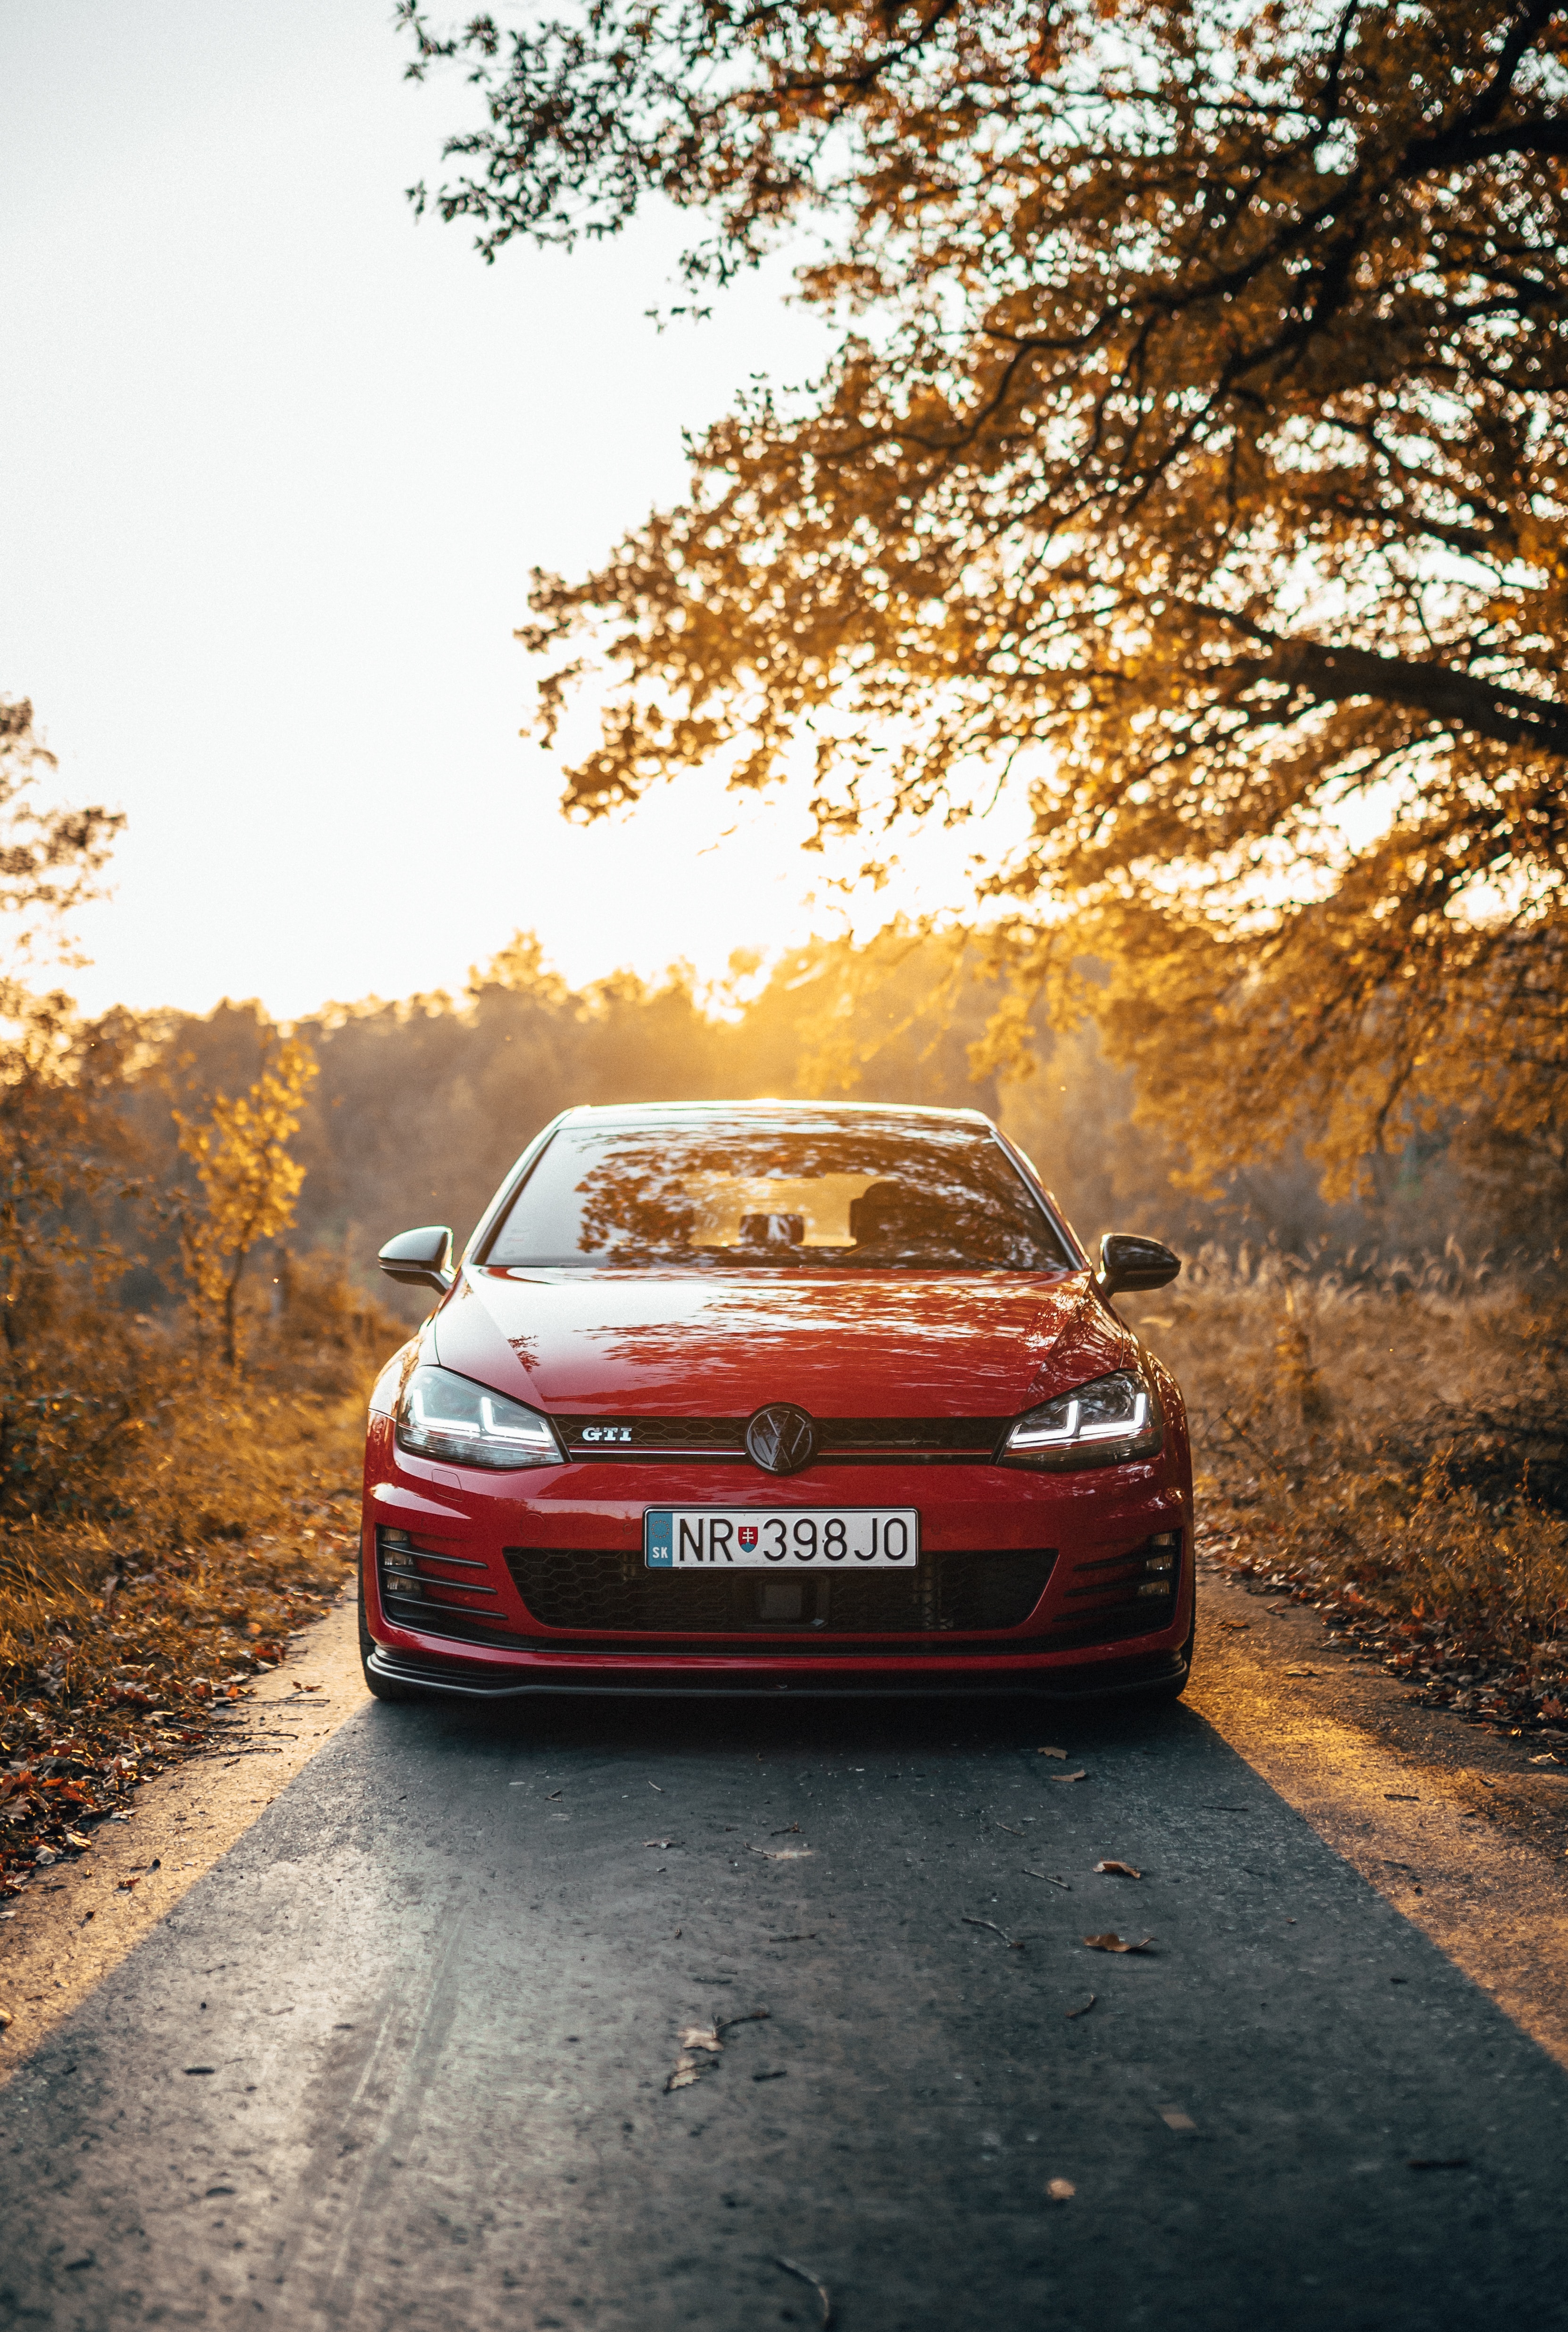 95125 download wallpaper volkswagen, front view, cars, red, car, machine, volkswagen golf gti screensavers and pictures for free